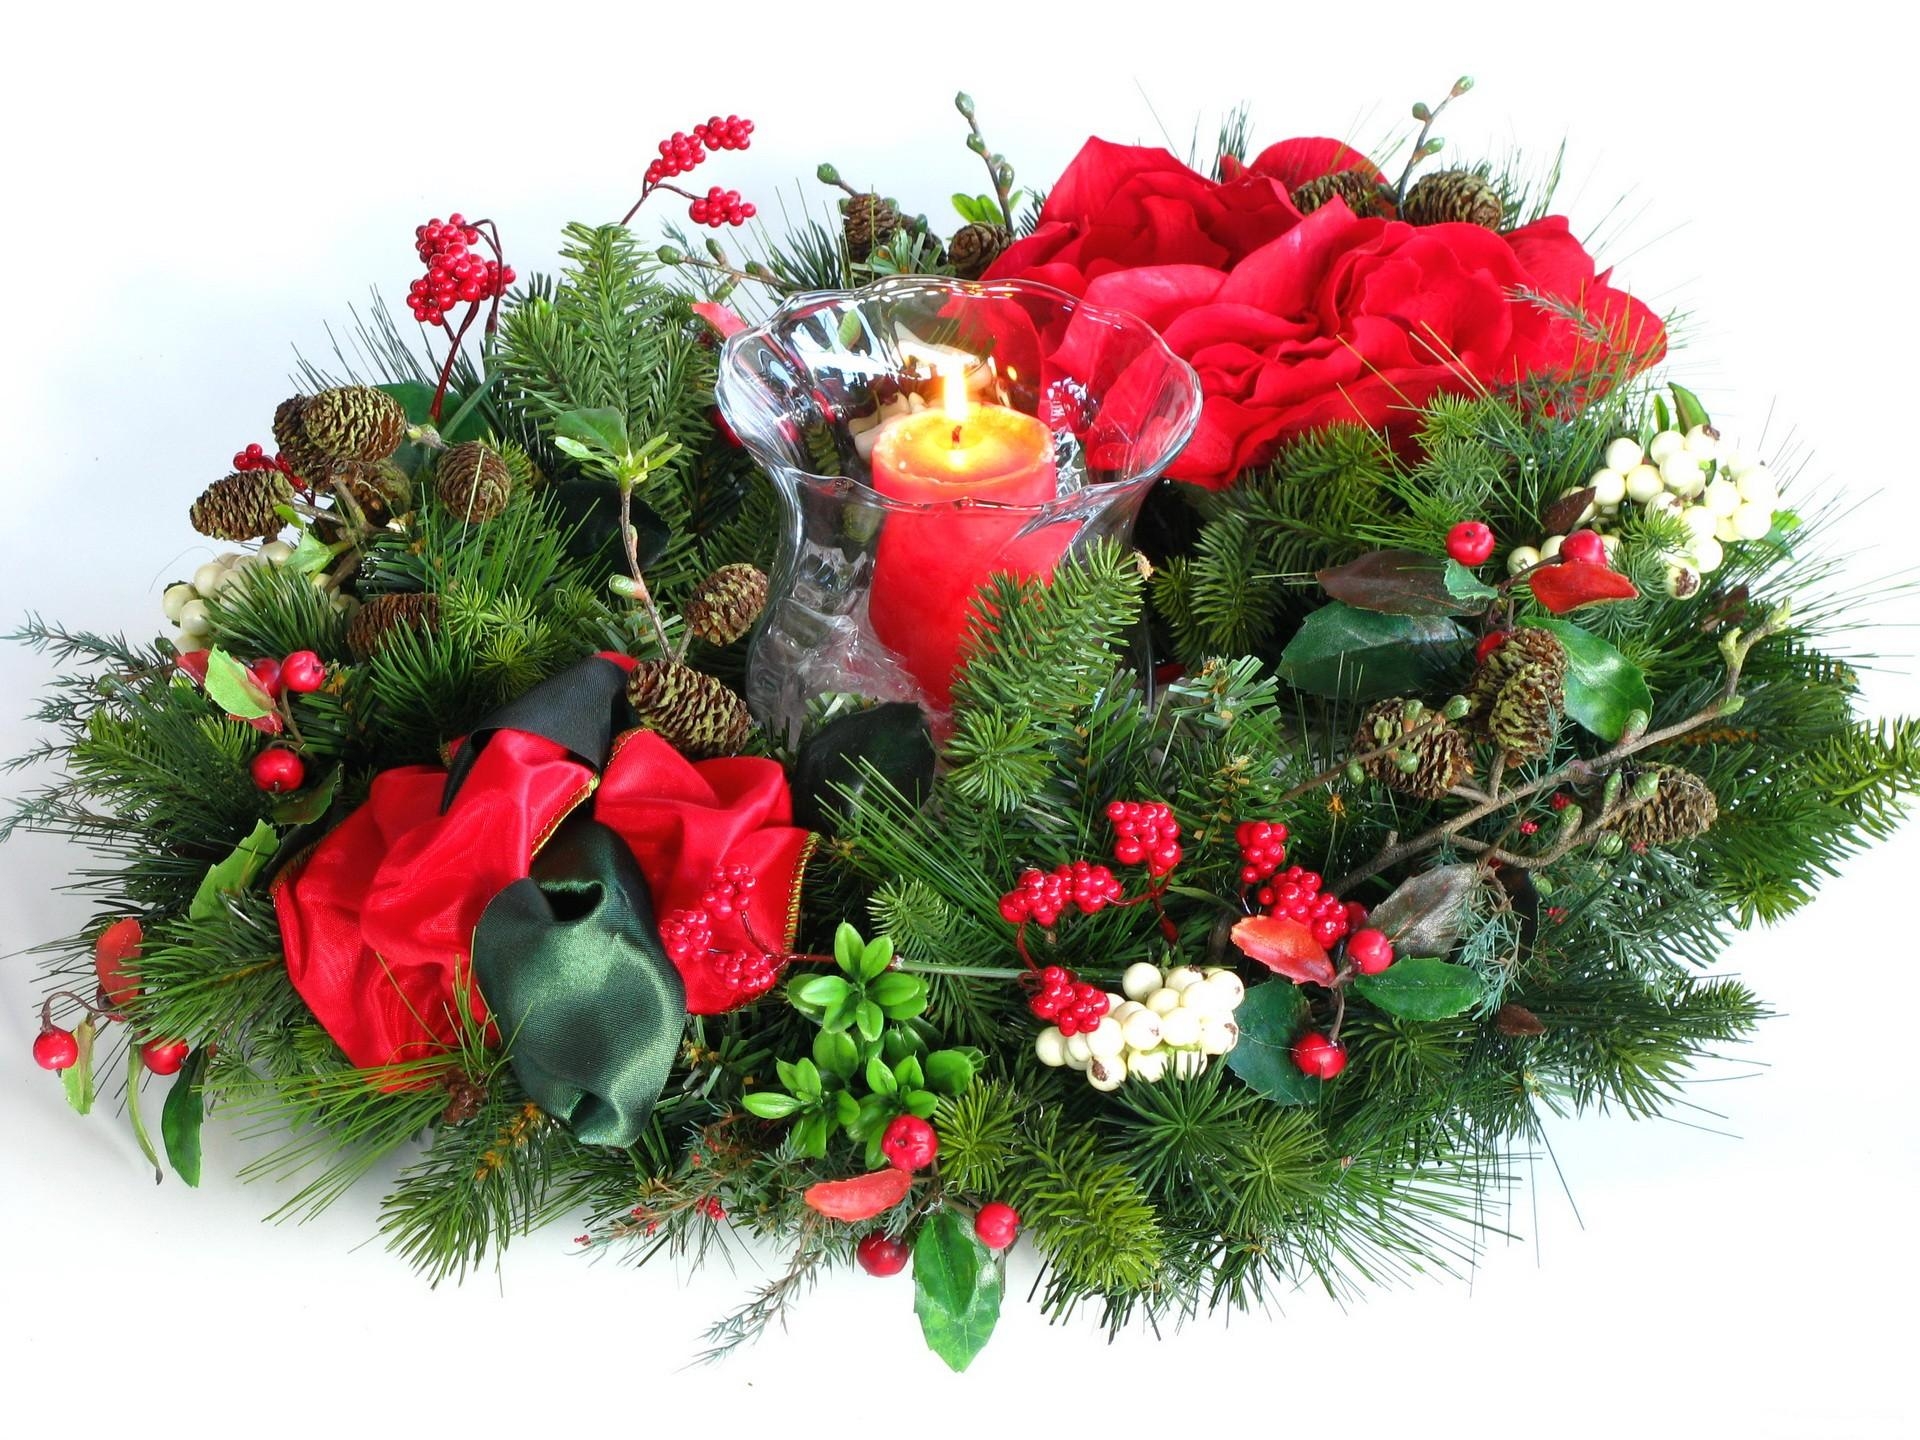 holidays, cones, new year, christmas, holiday, needles, candle, wreath 2160p